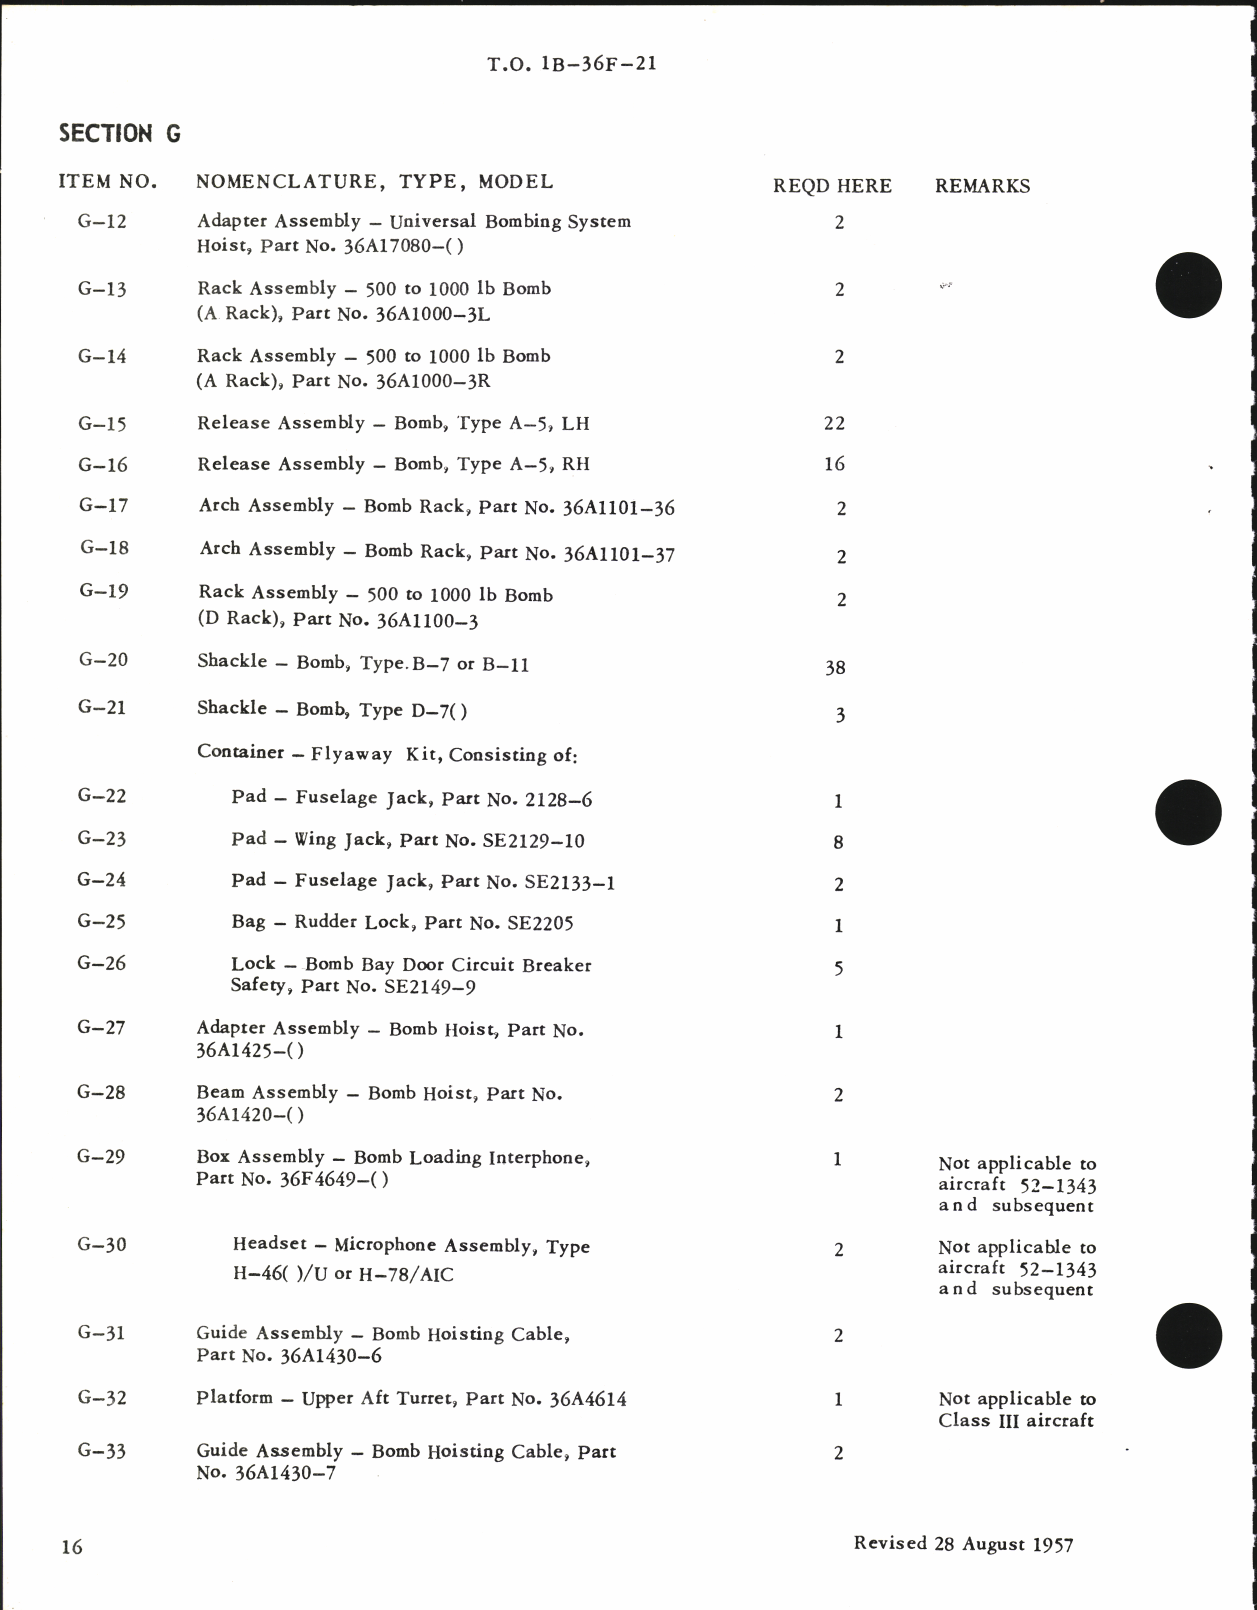 Sample page 8 from AirCorps Library document: Master Guide Aircraft Inventory Record for B-36F, H, and J Aircraft